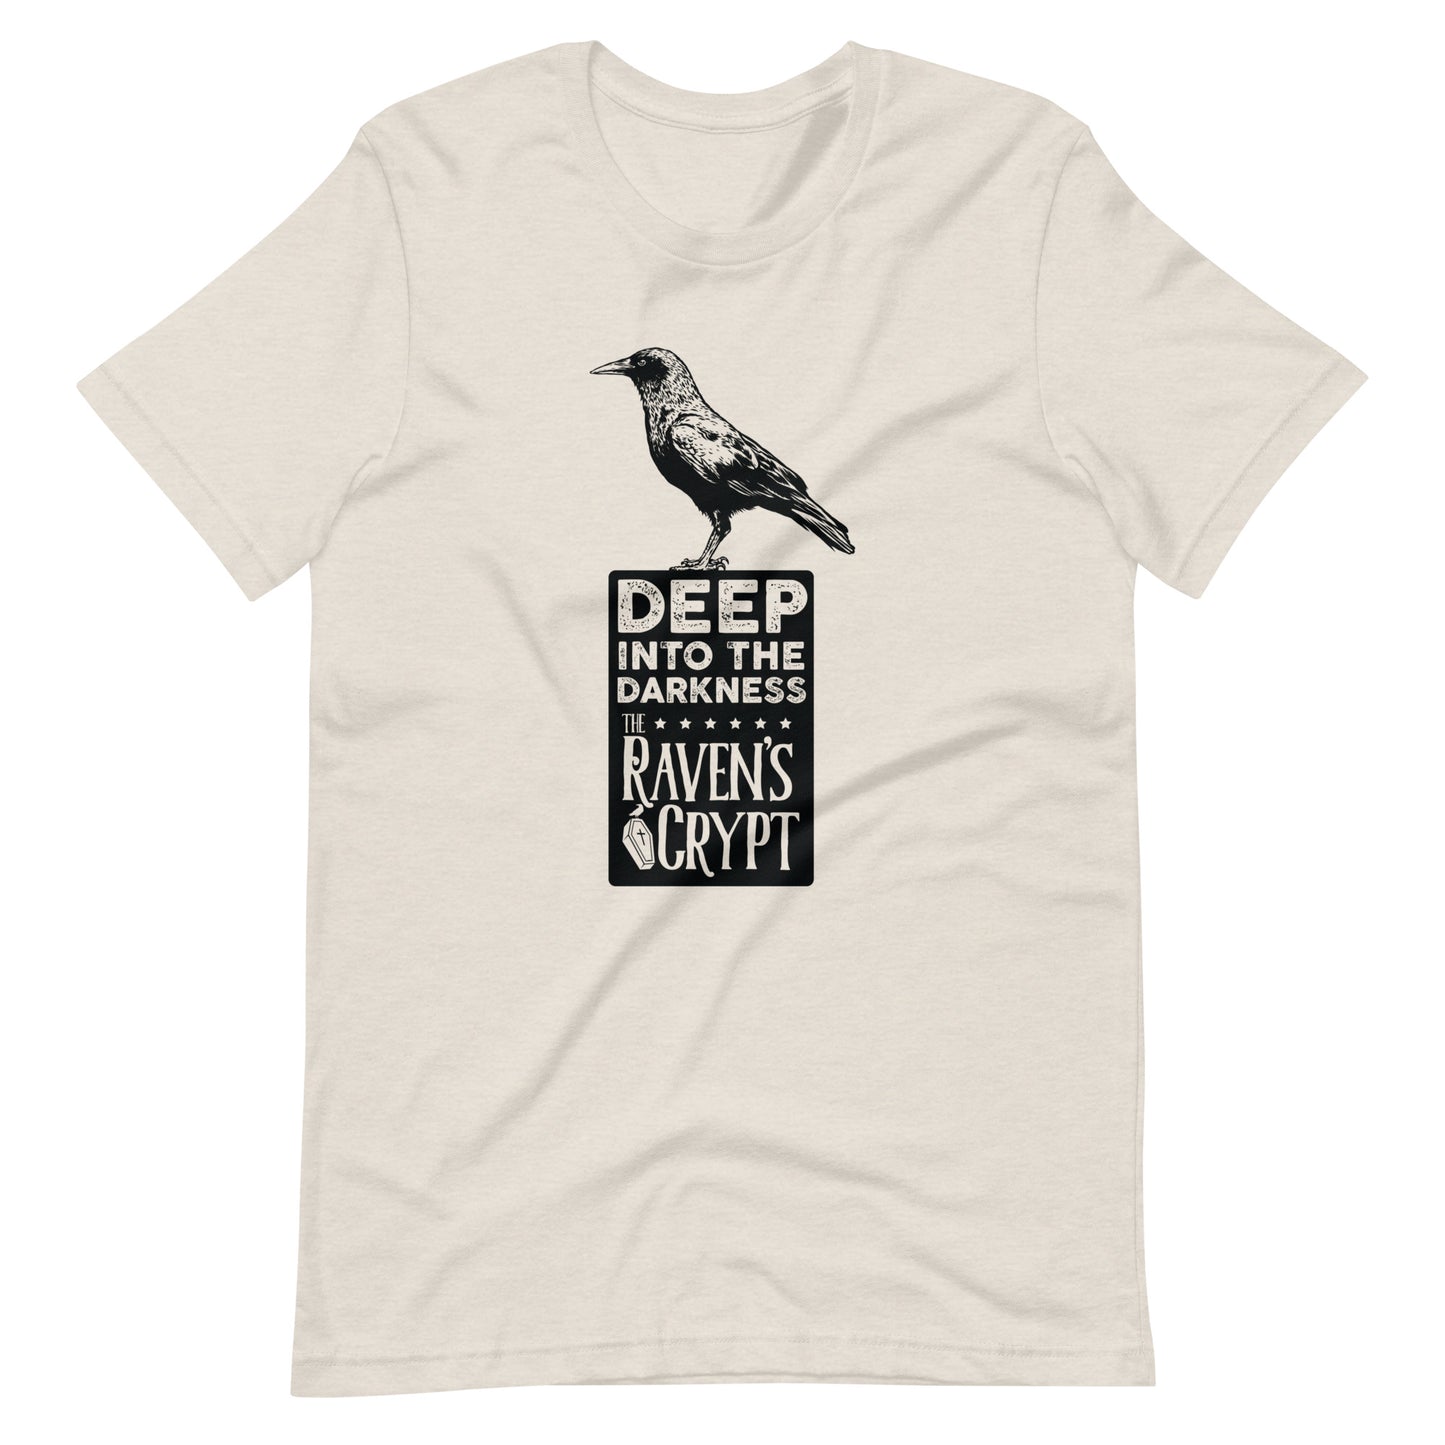 Deep Into the Darkness Crypt 2 - Men's t-shirt- Heather Dust Front